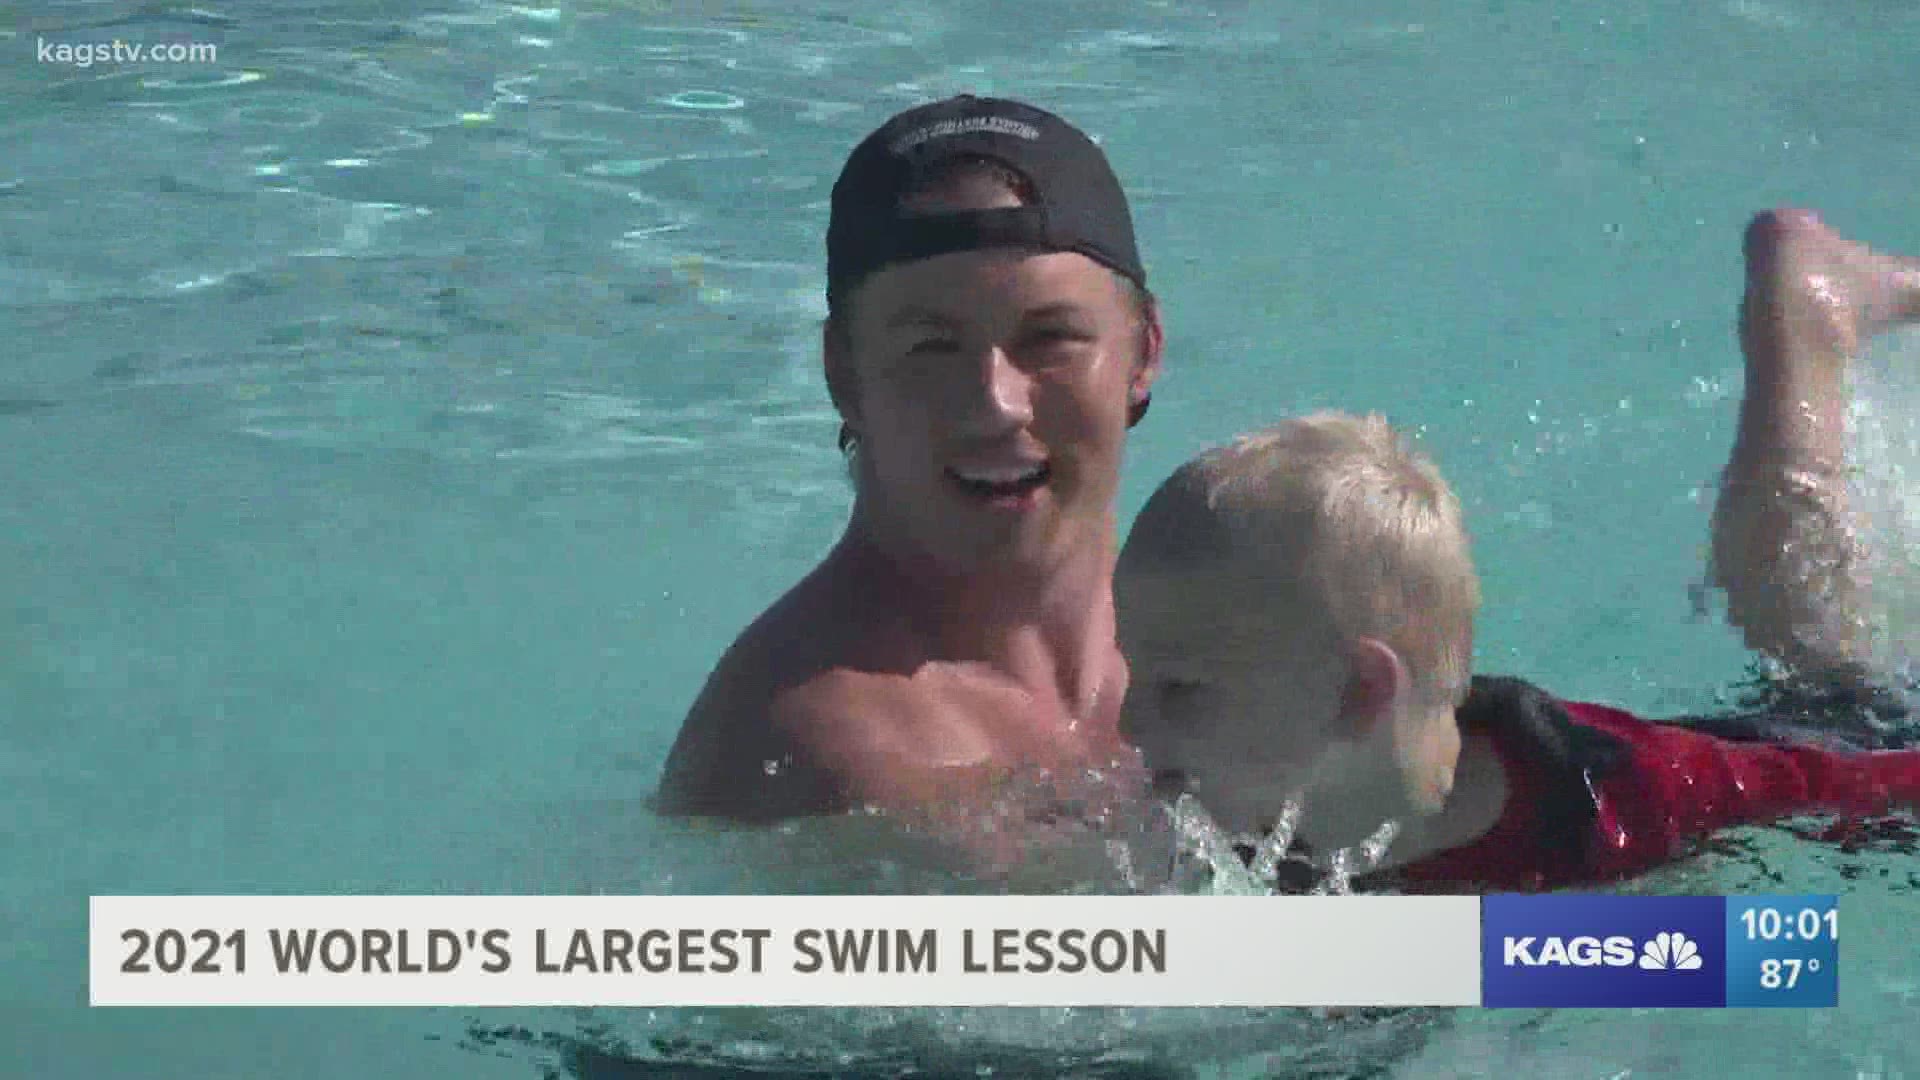 Bryan Aquatic Center took part in the yearly "World's Largest Swim Lesson" to bring awareness of aquatic safety.